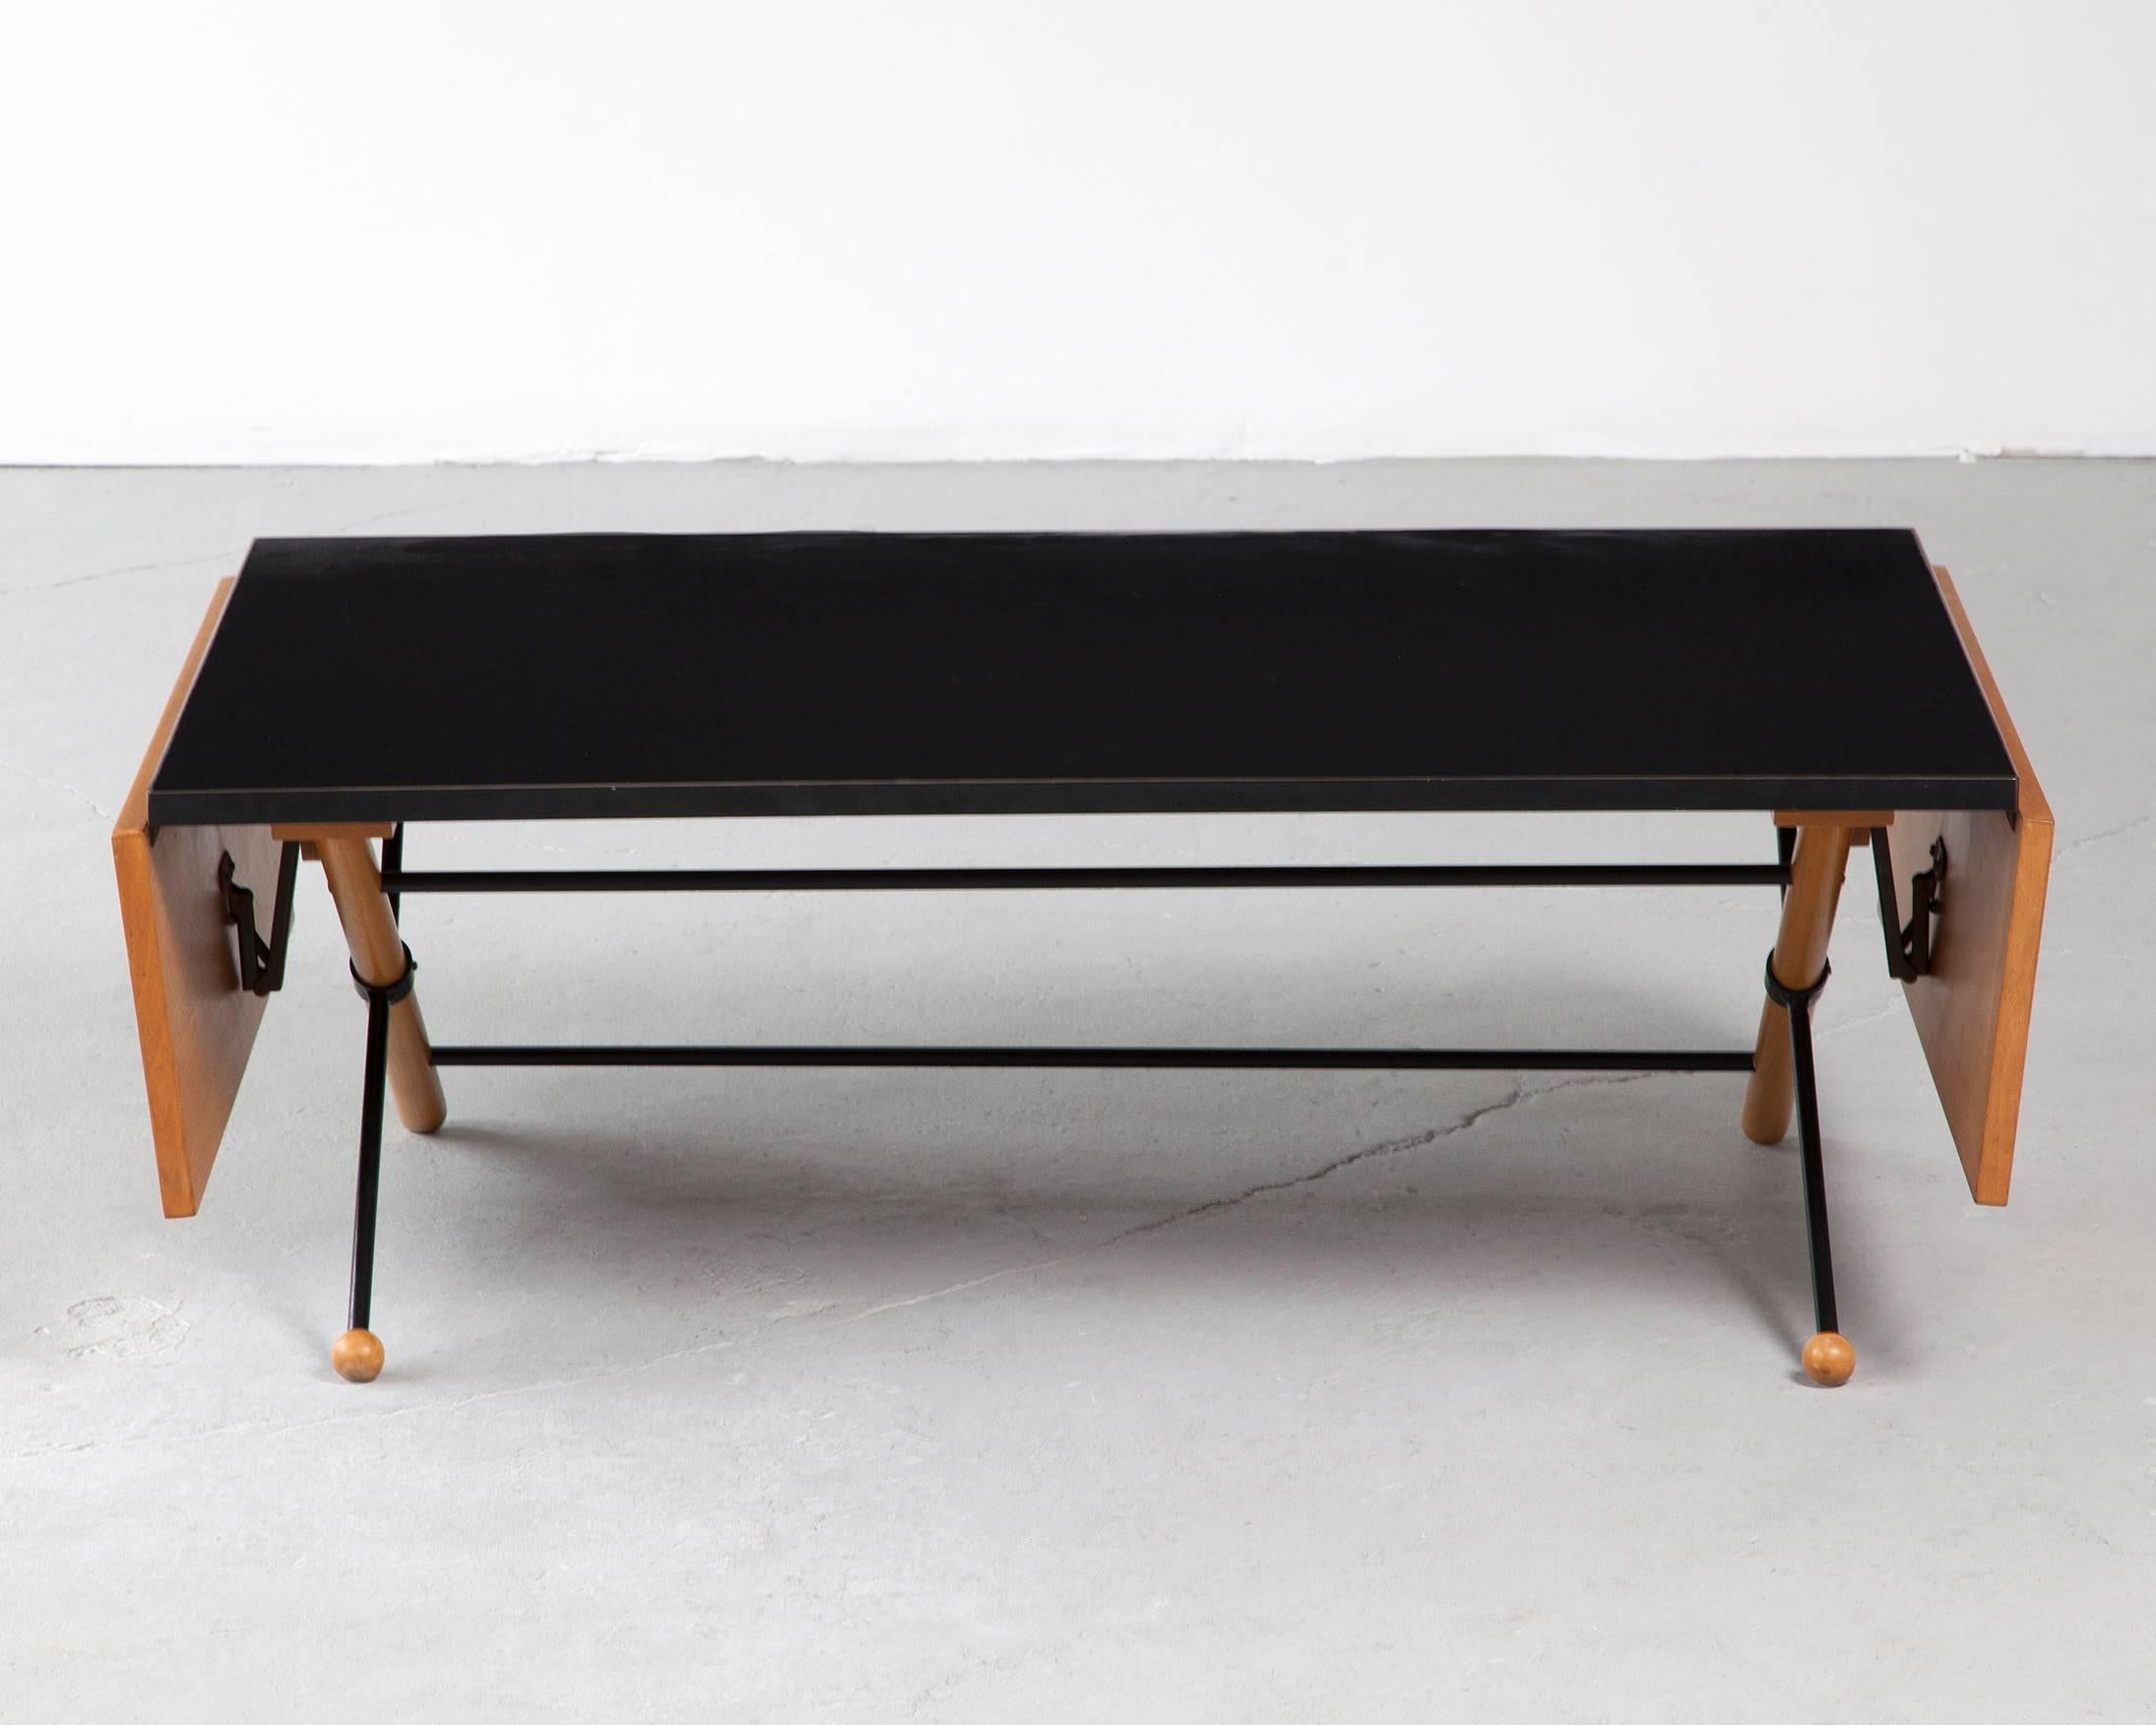 Coffee table in walnut, steel and plastic laminate with folding leaves. Designed by Greta Magnusson Grossman for Glenn of California, Los Angeles, 1952.